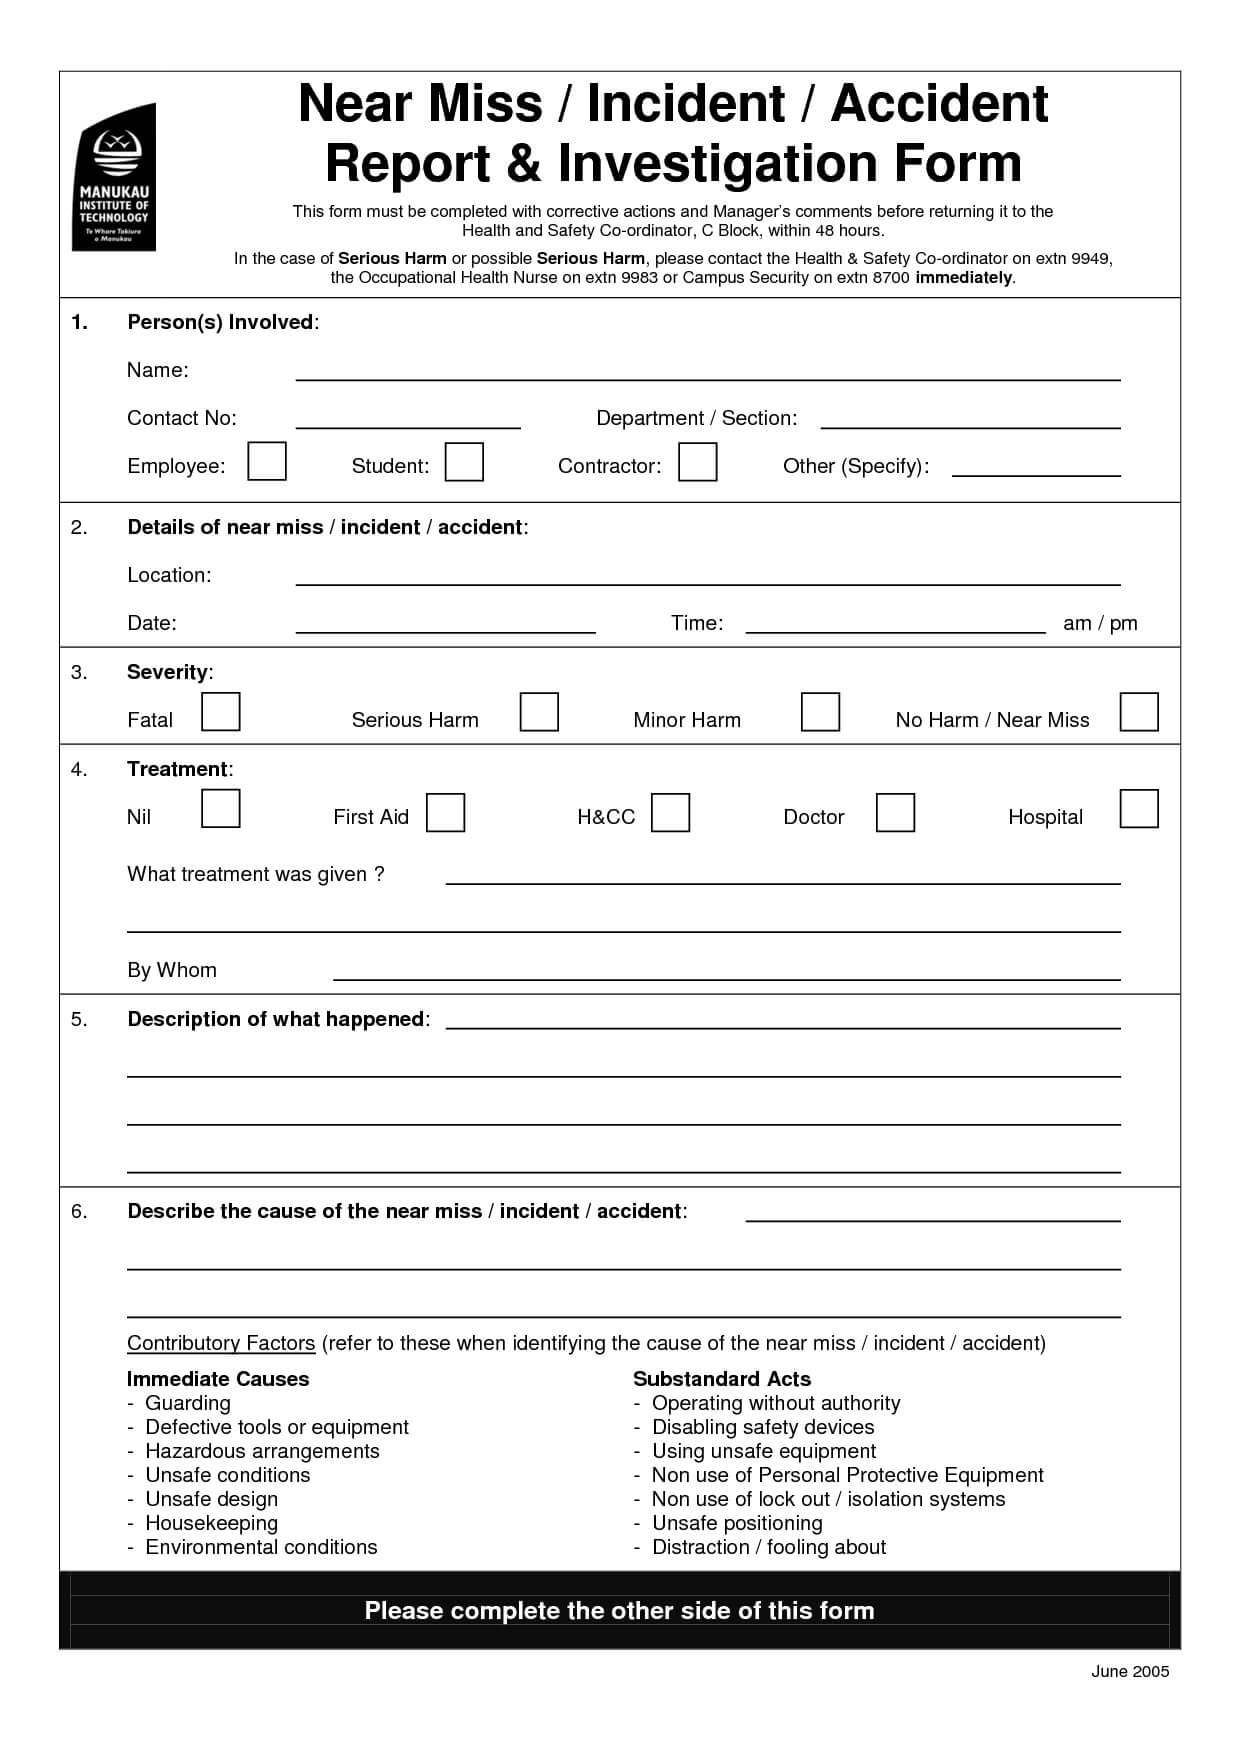 Traffic Ident Investigation Report Format Form Hse Incident Regarding Ohs Incident Report Template Free